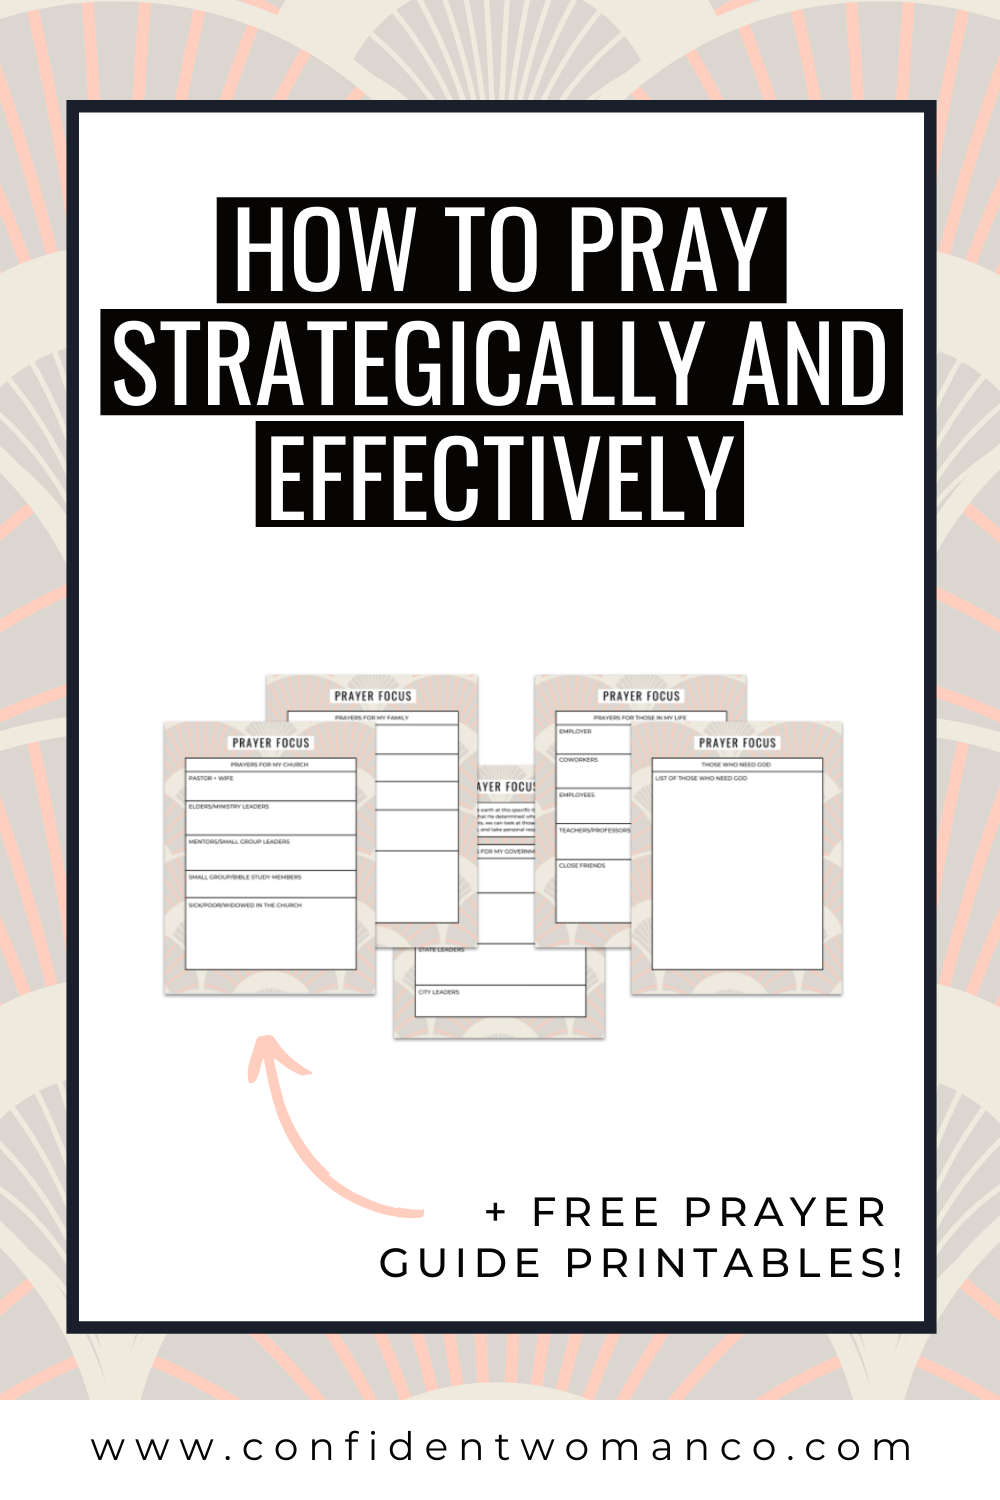 How to Pray Strategically and Effectively | Confident Woman Co.